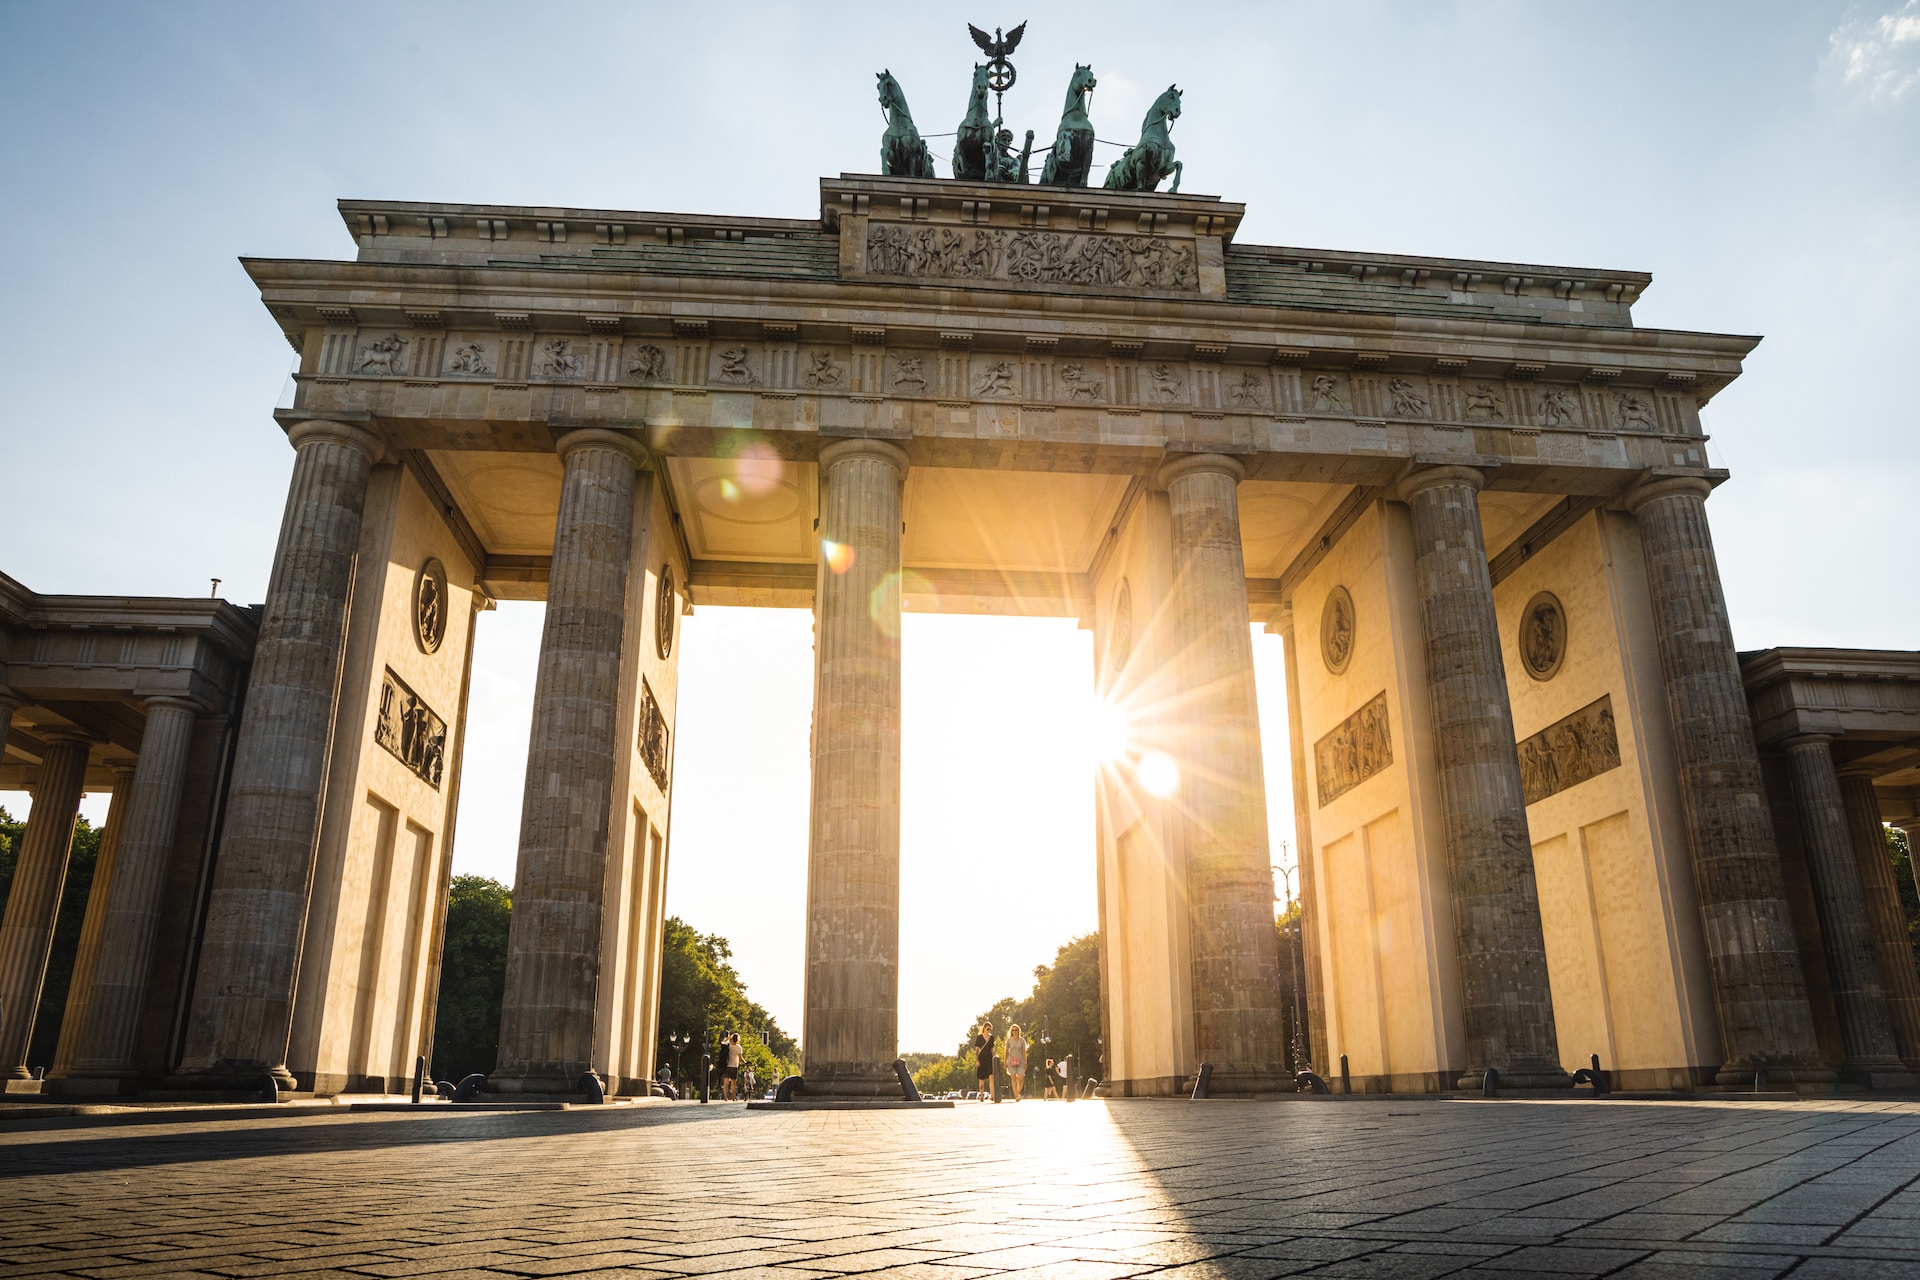 Why should you explore Berlin by walking in the footsteps of famous Berliners?